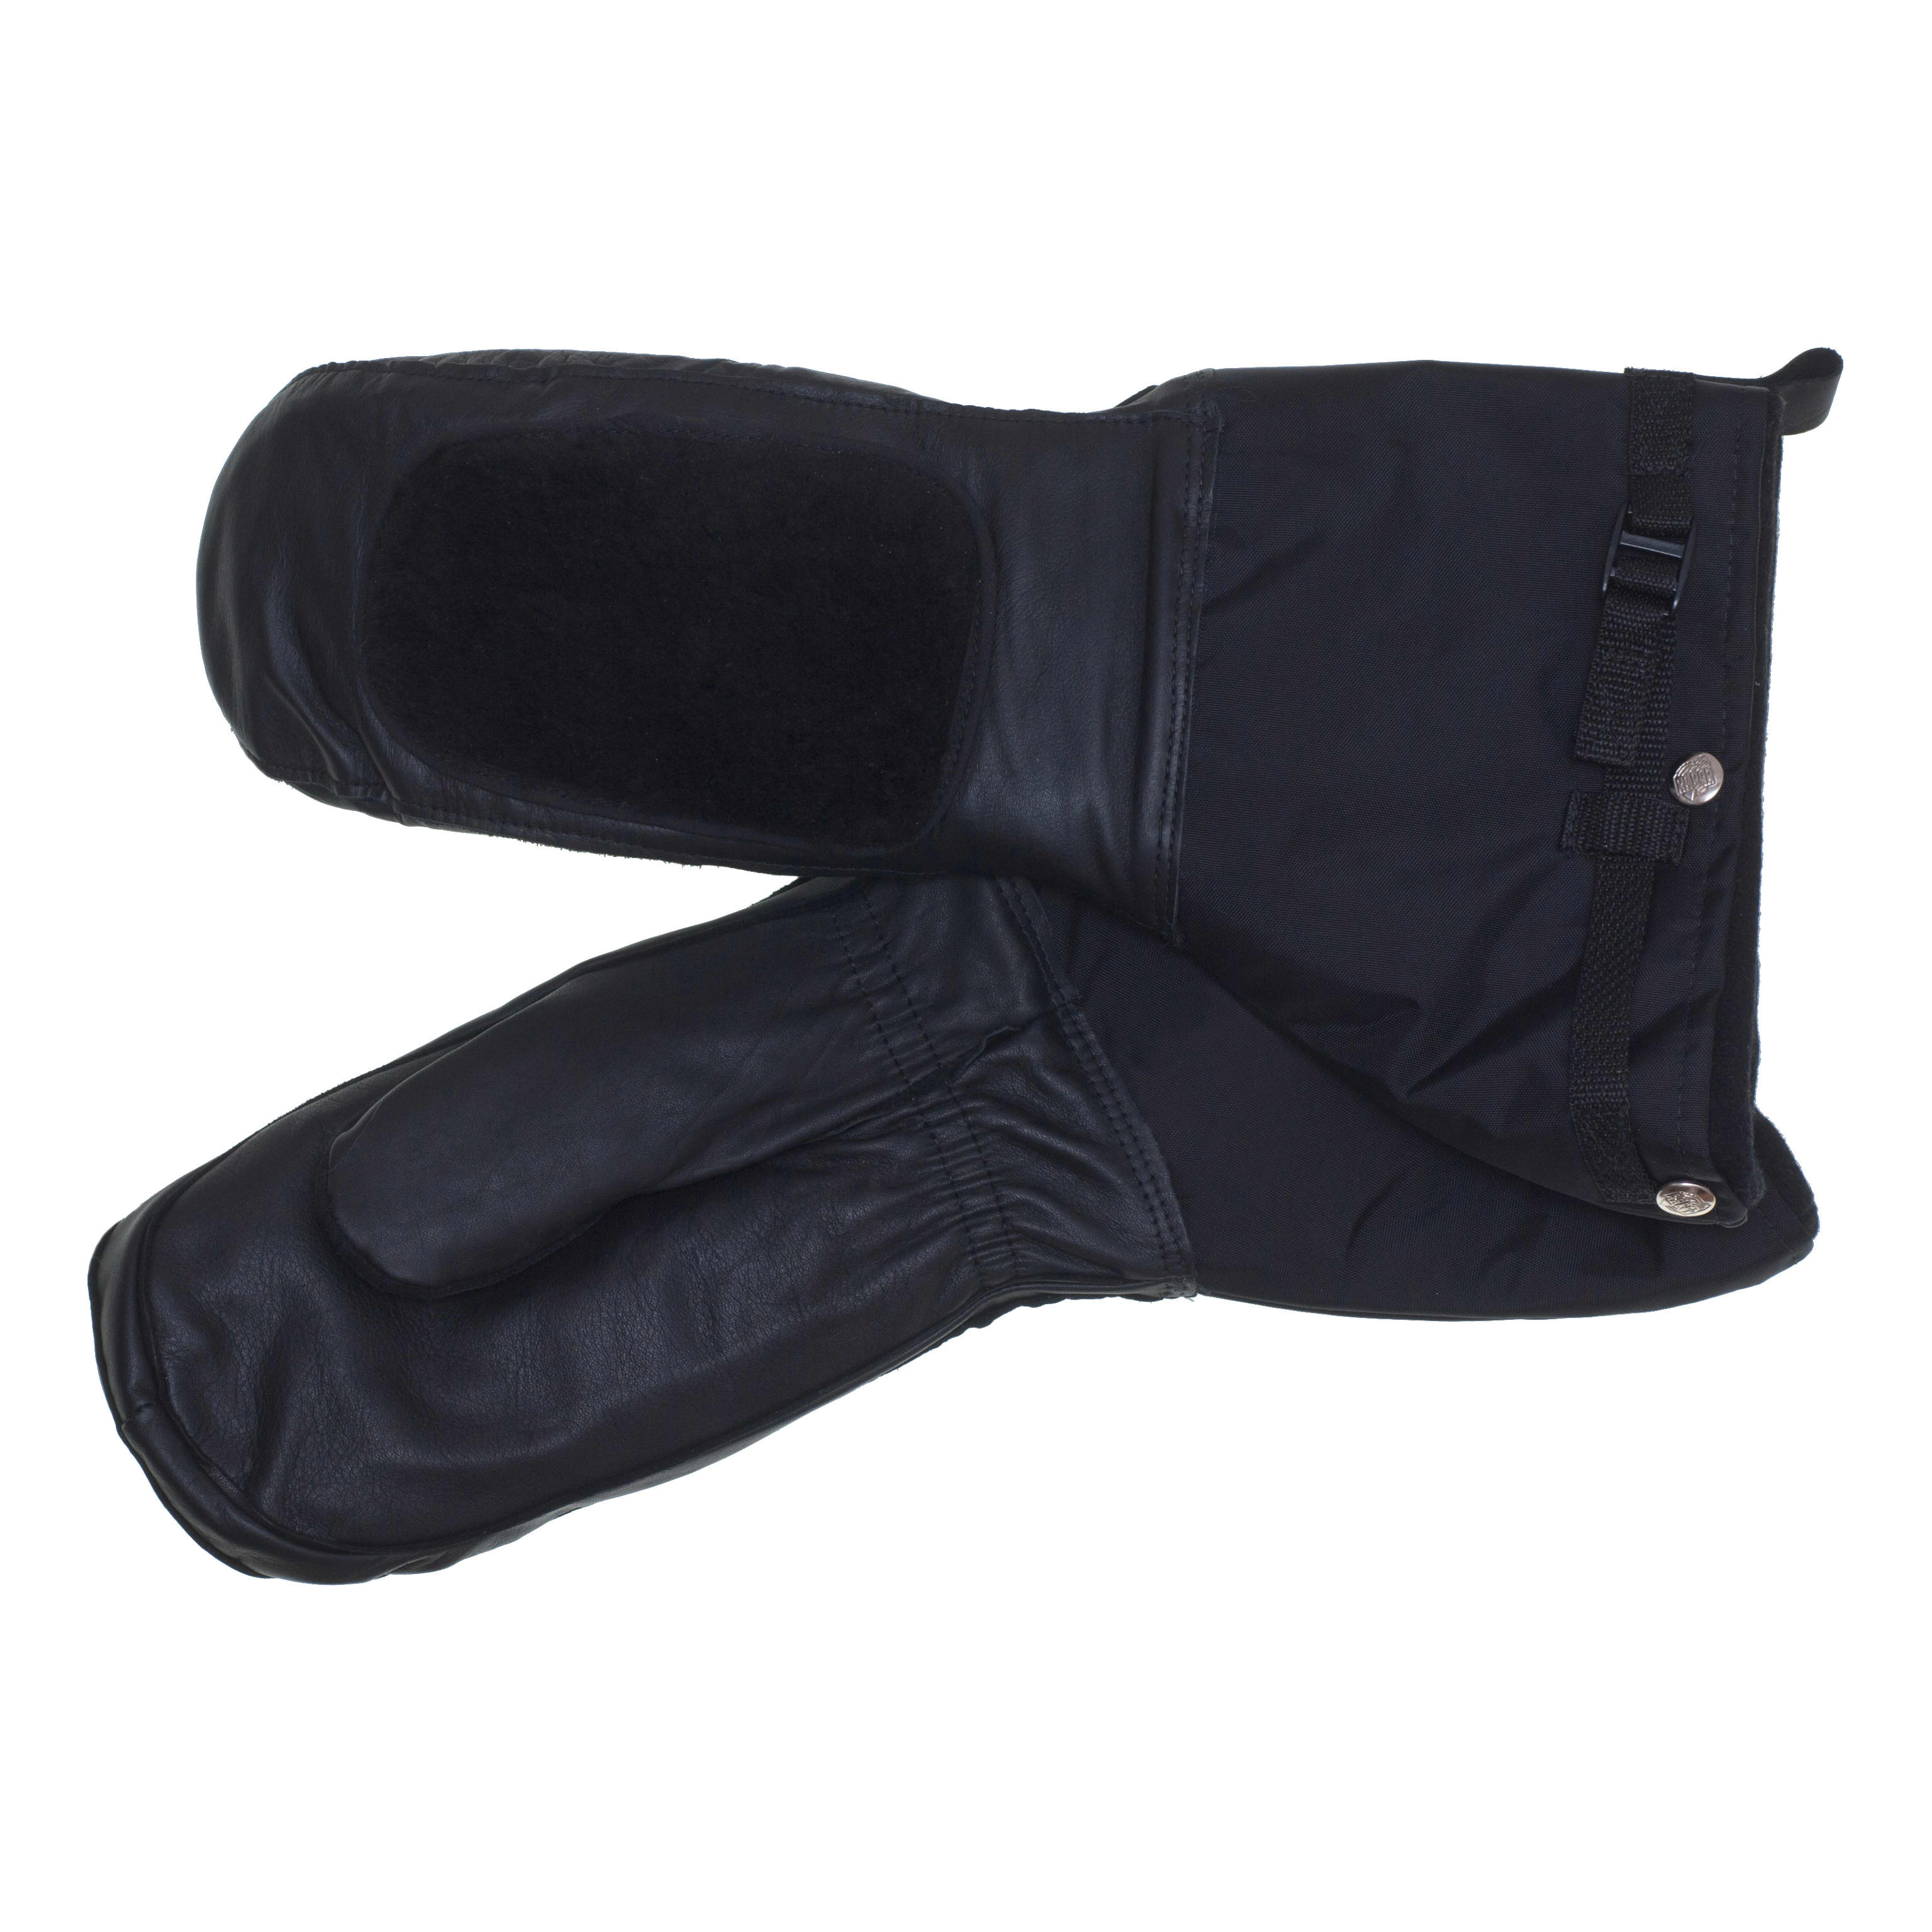 Raber HY-Arctic Extreme Gauntlet Mitt - Military Issue for Arctic Use